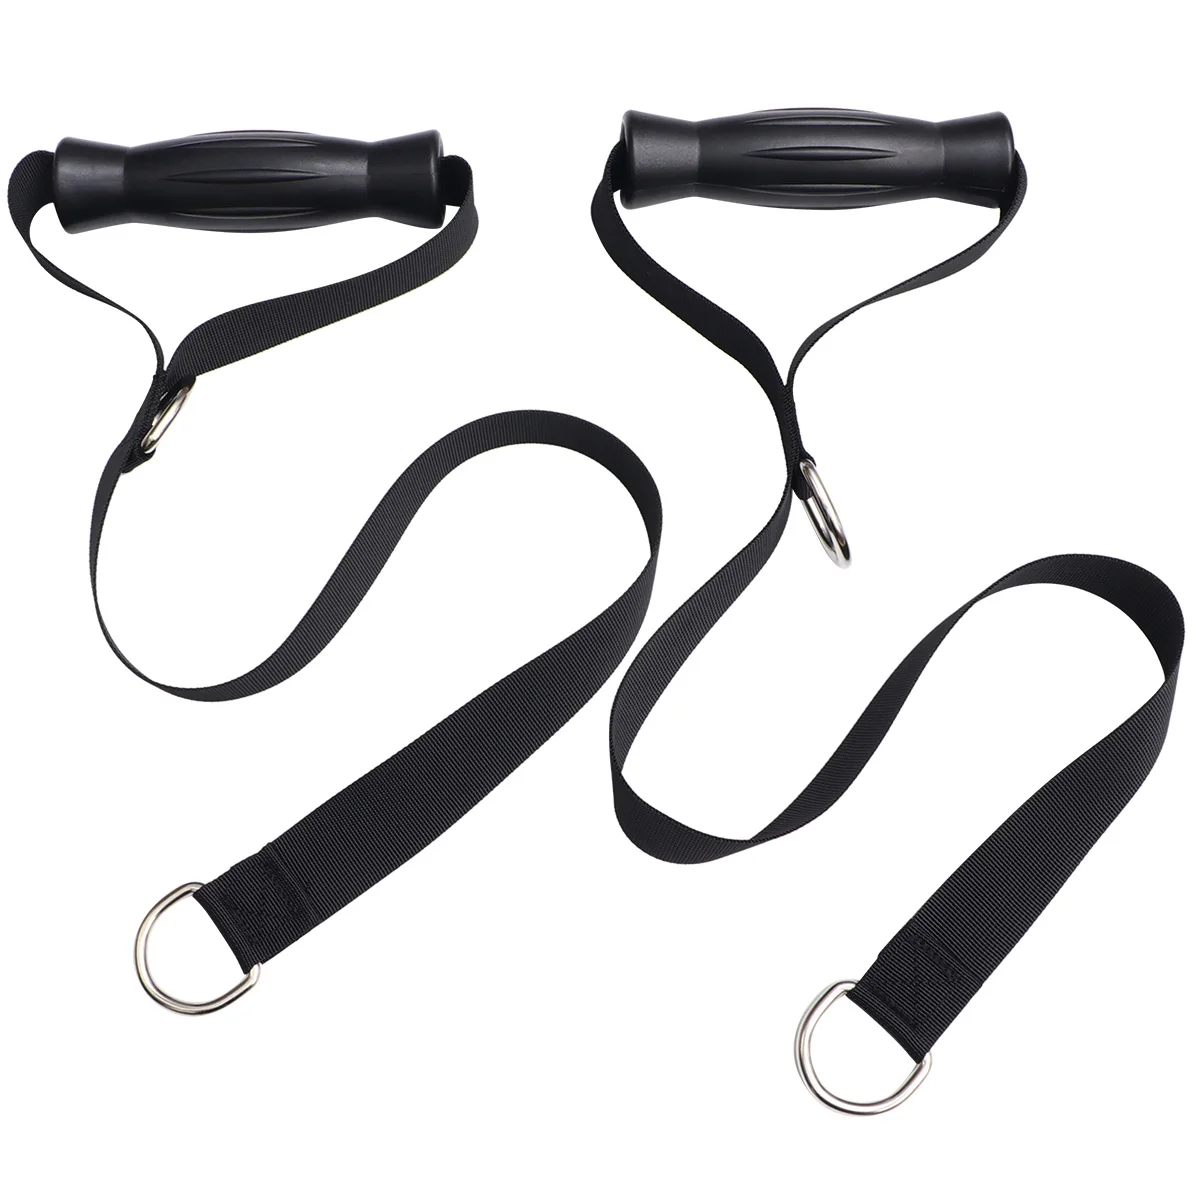 

Rope Handles Exercise Strength Training Tricep Attachment Bands Strap Trainning Fitness Rope， Arm Resistance Handle Ropes